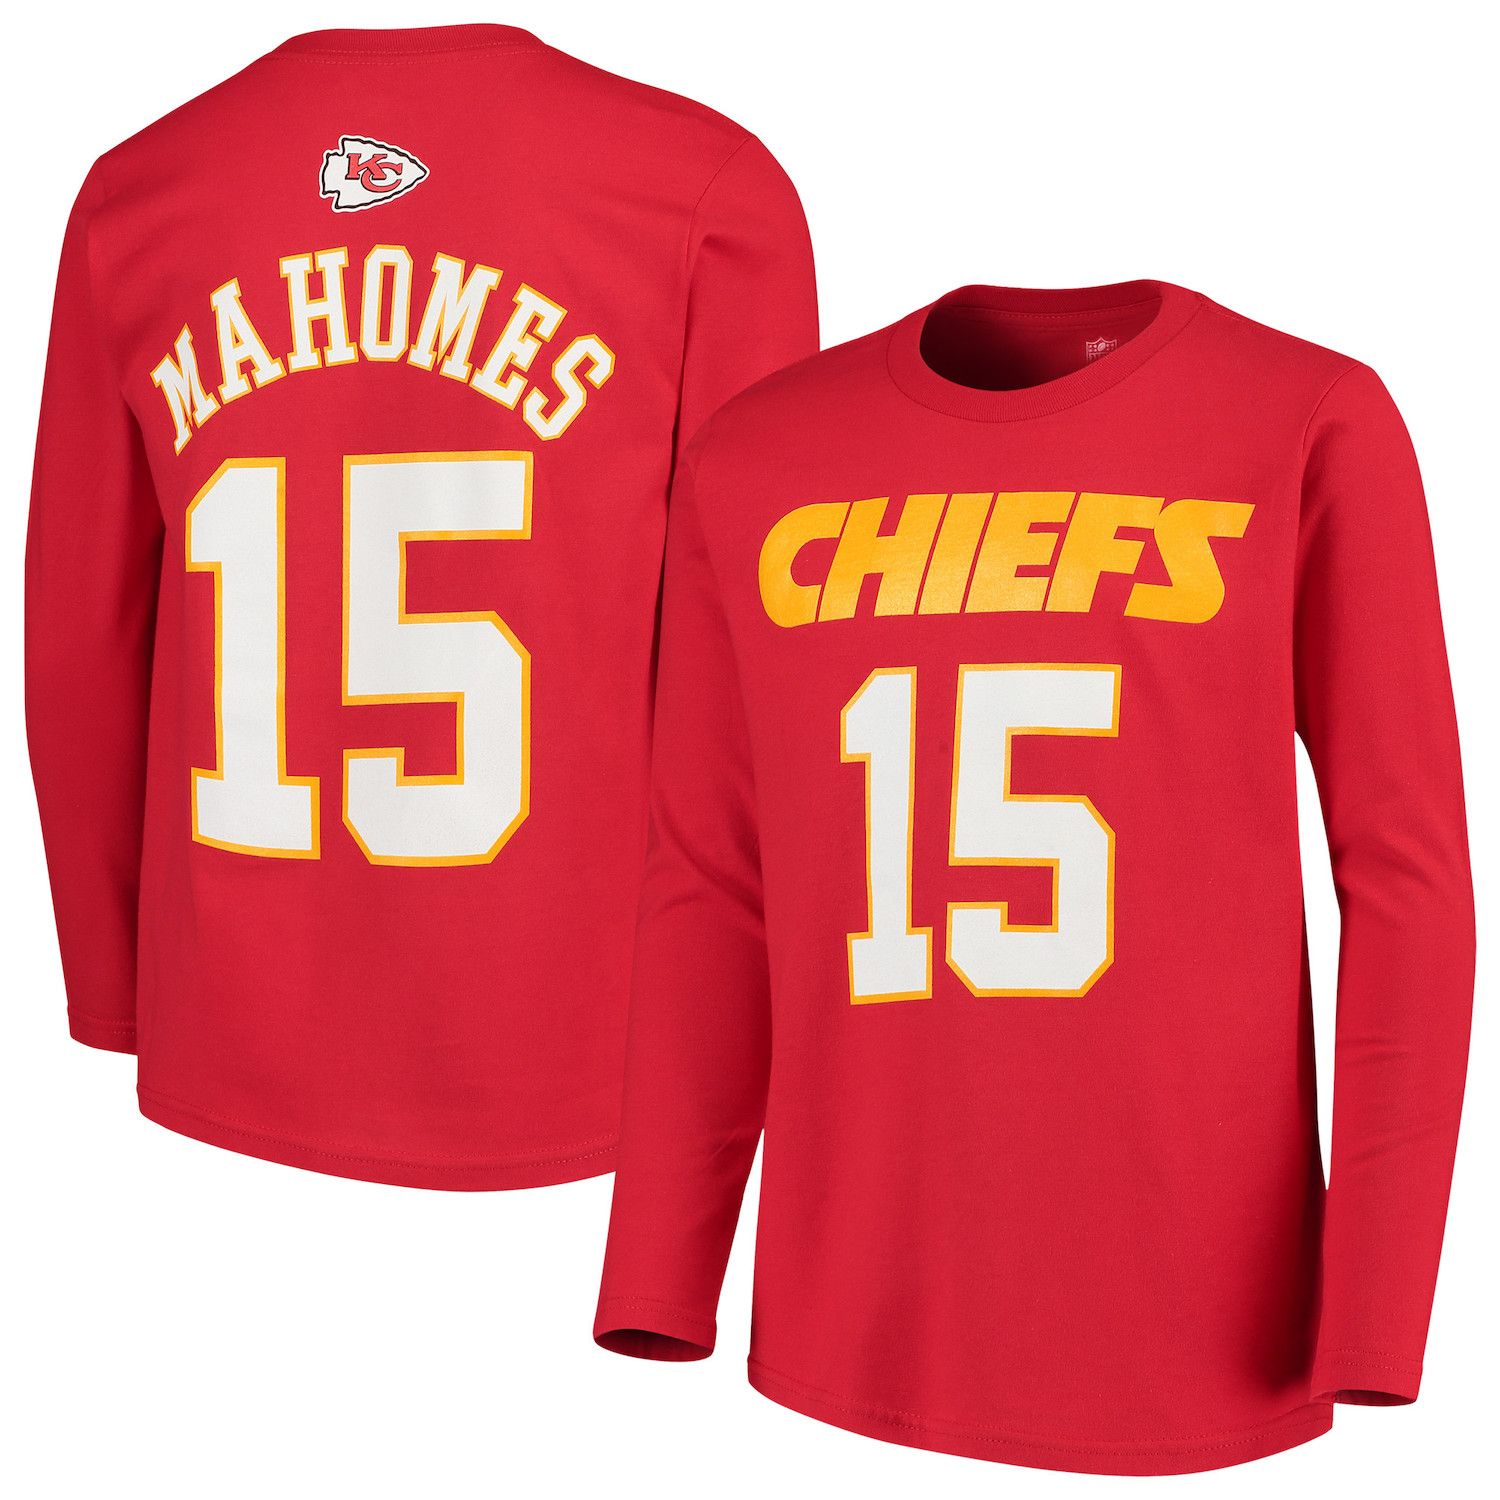 mahomes jersey for sale